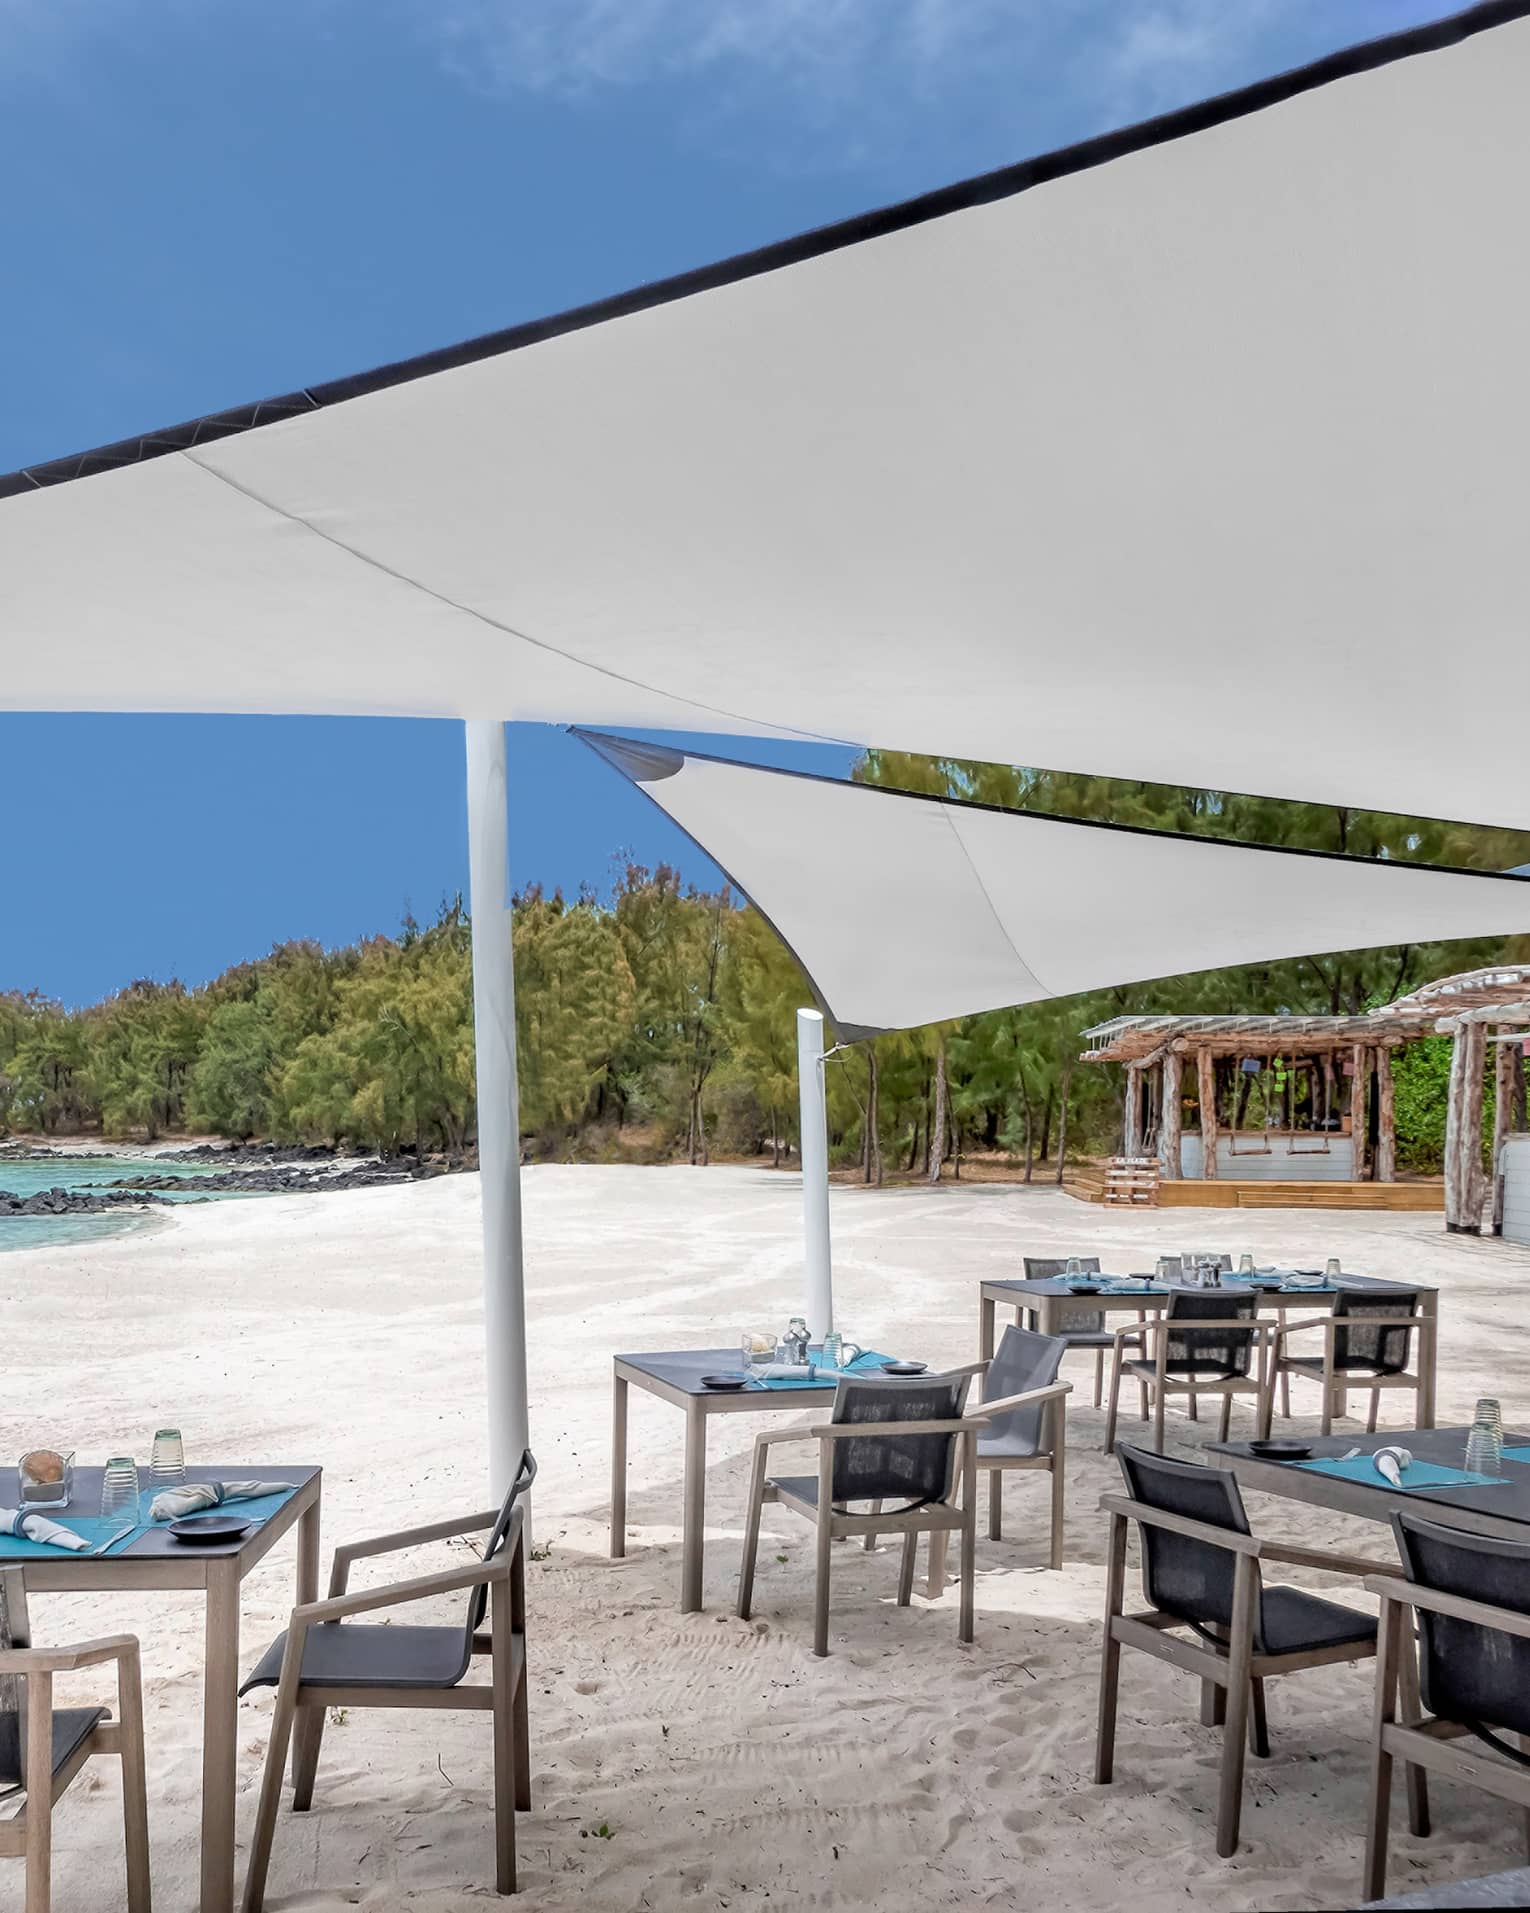 Small dining tables under white umbrella canopies on white sand beach near ocean